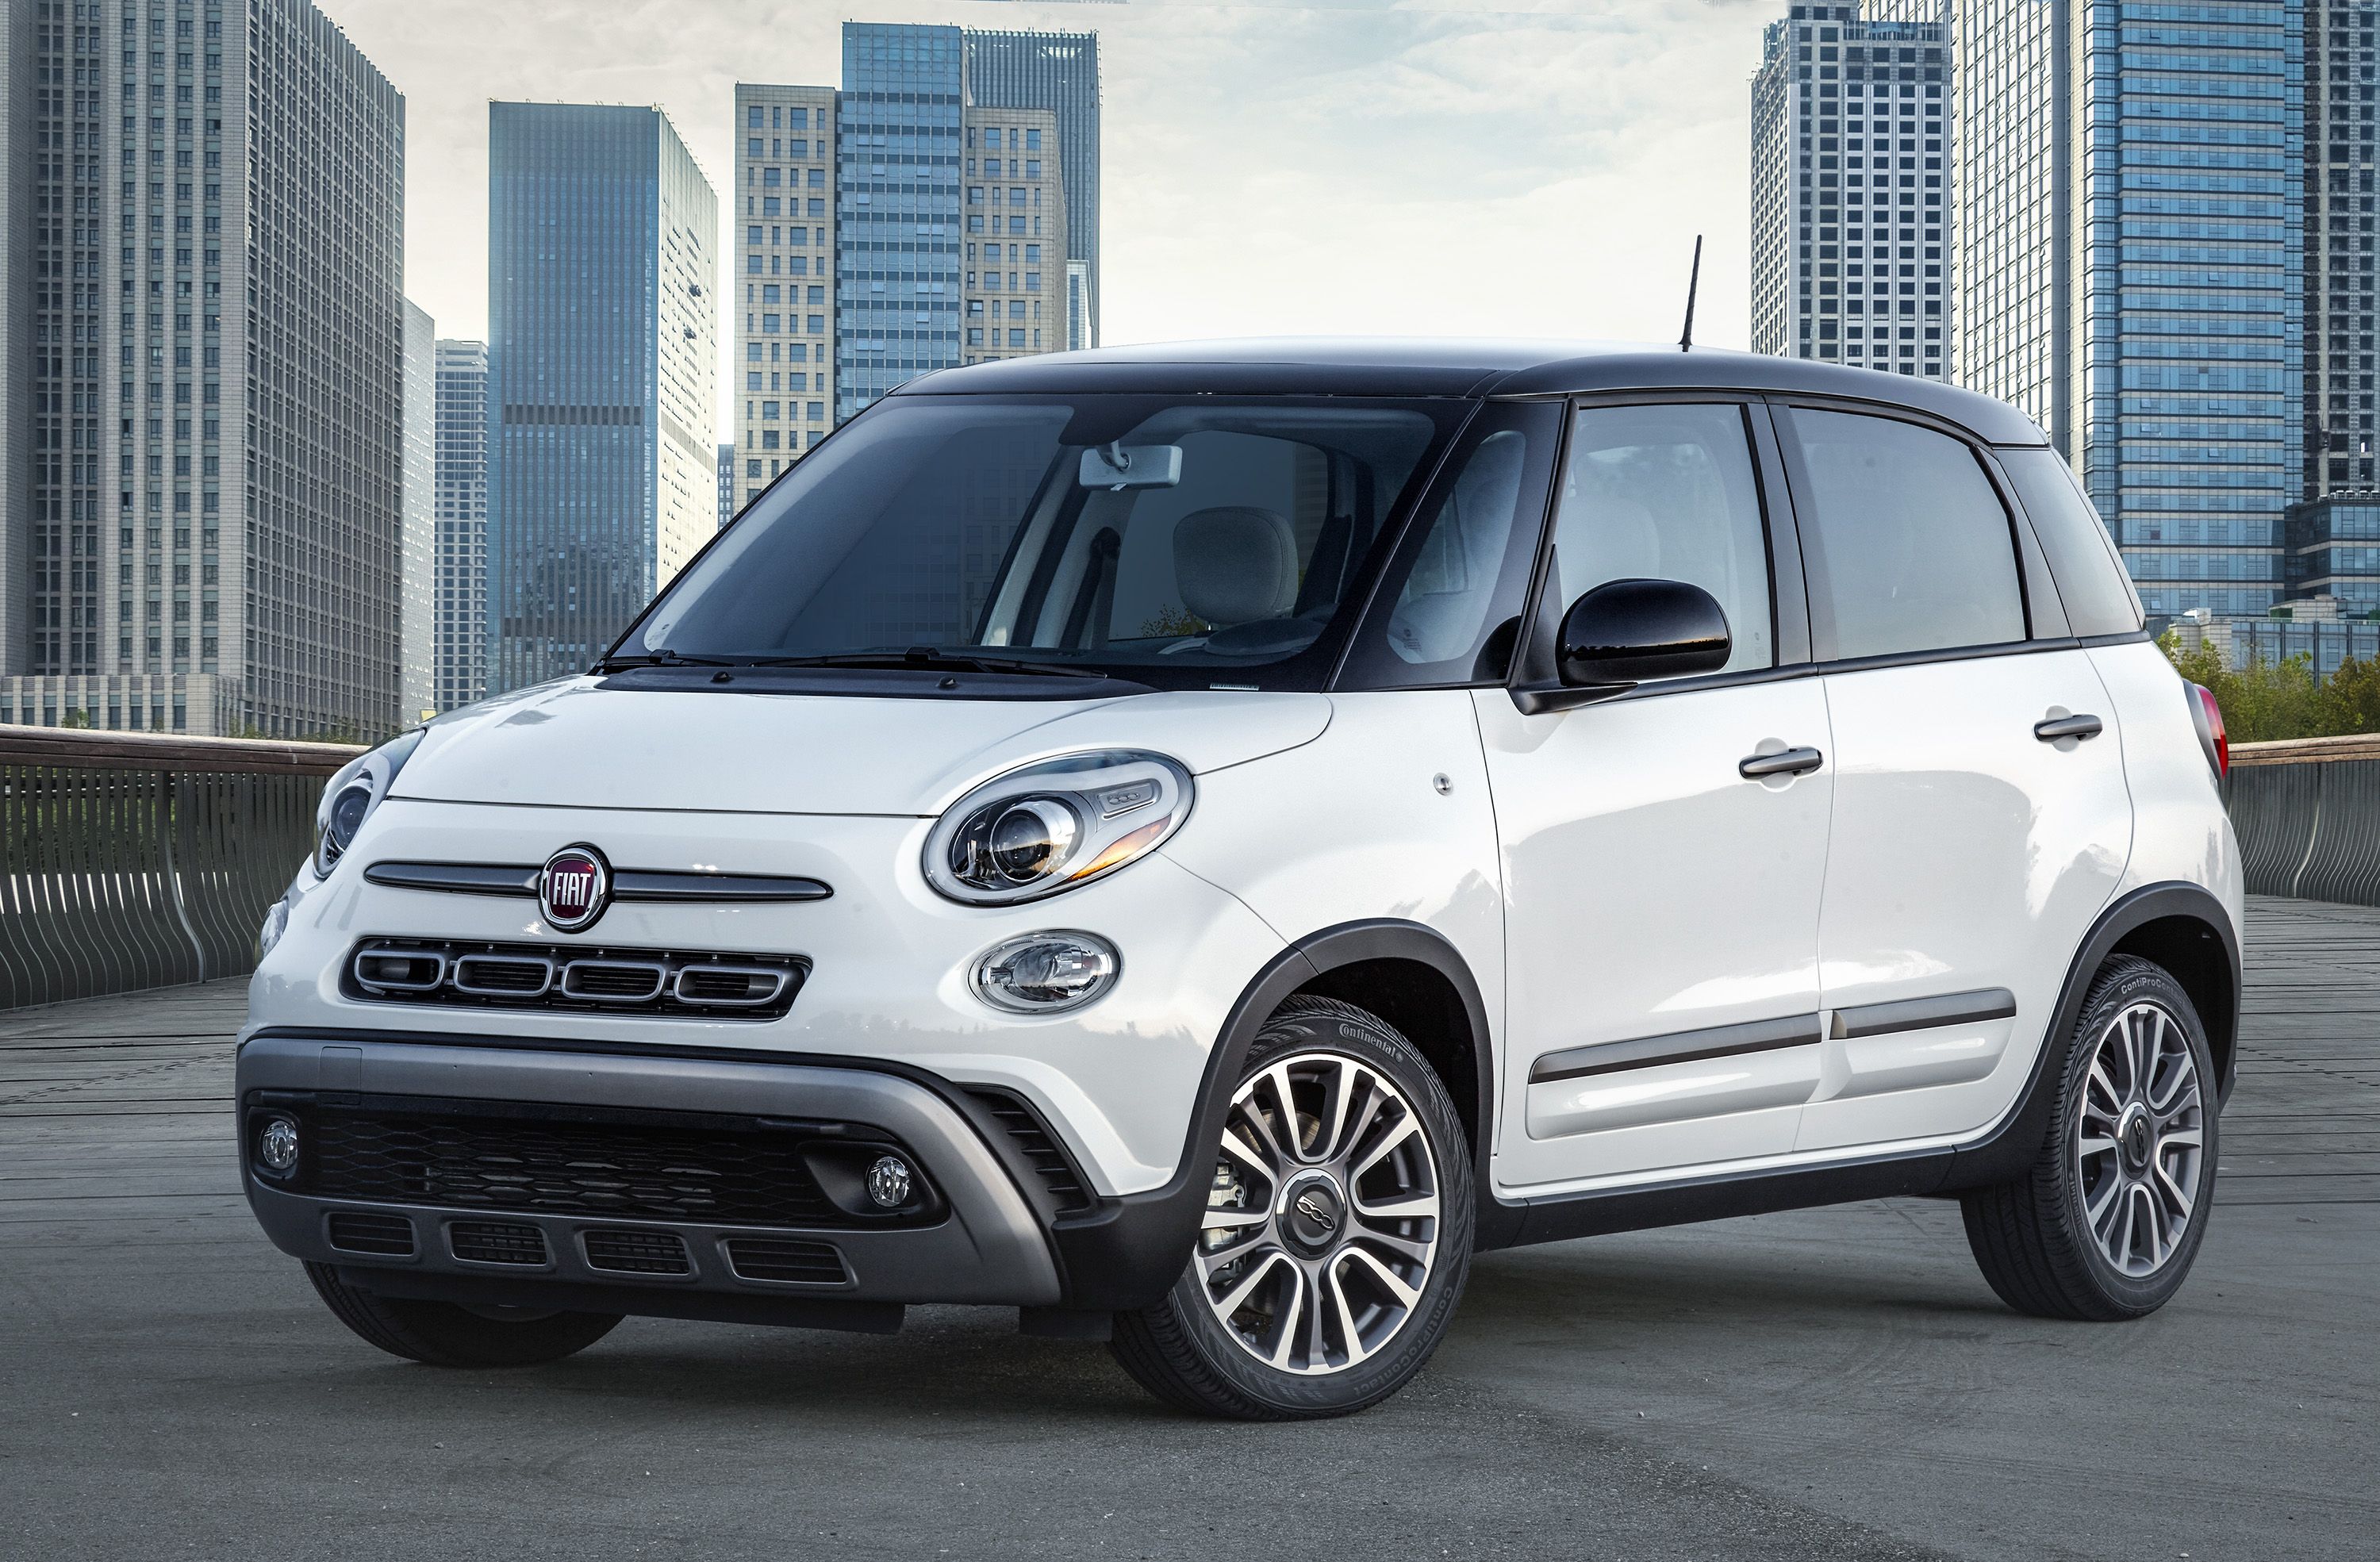 2020 Fiat 500L Review, Pricing, and Specs